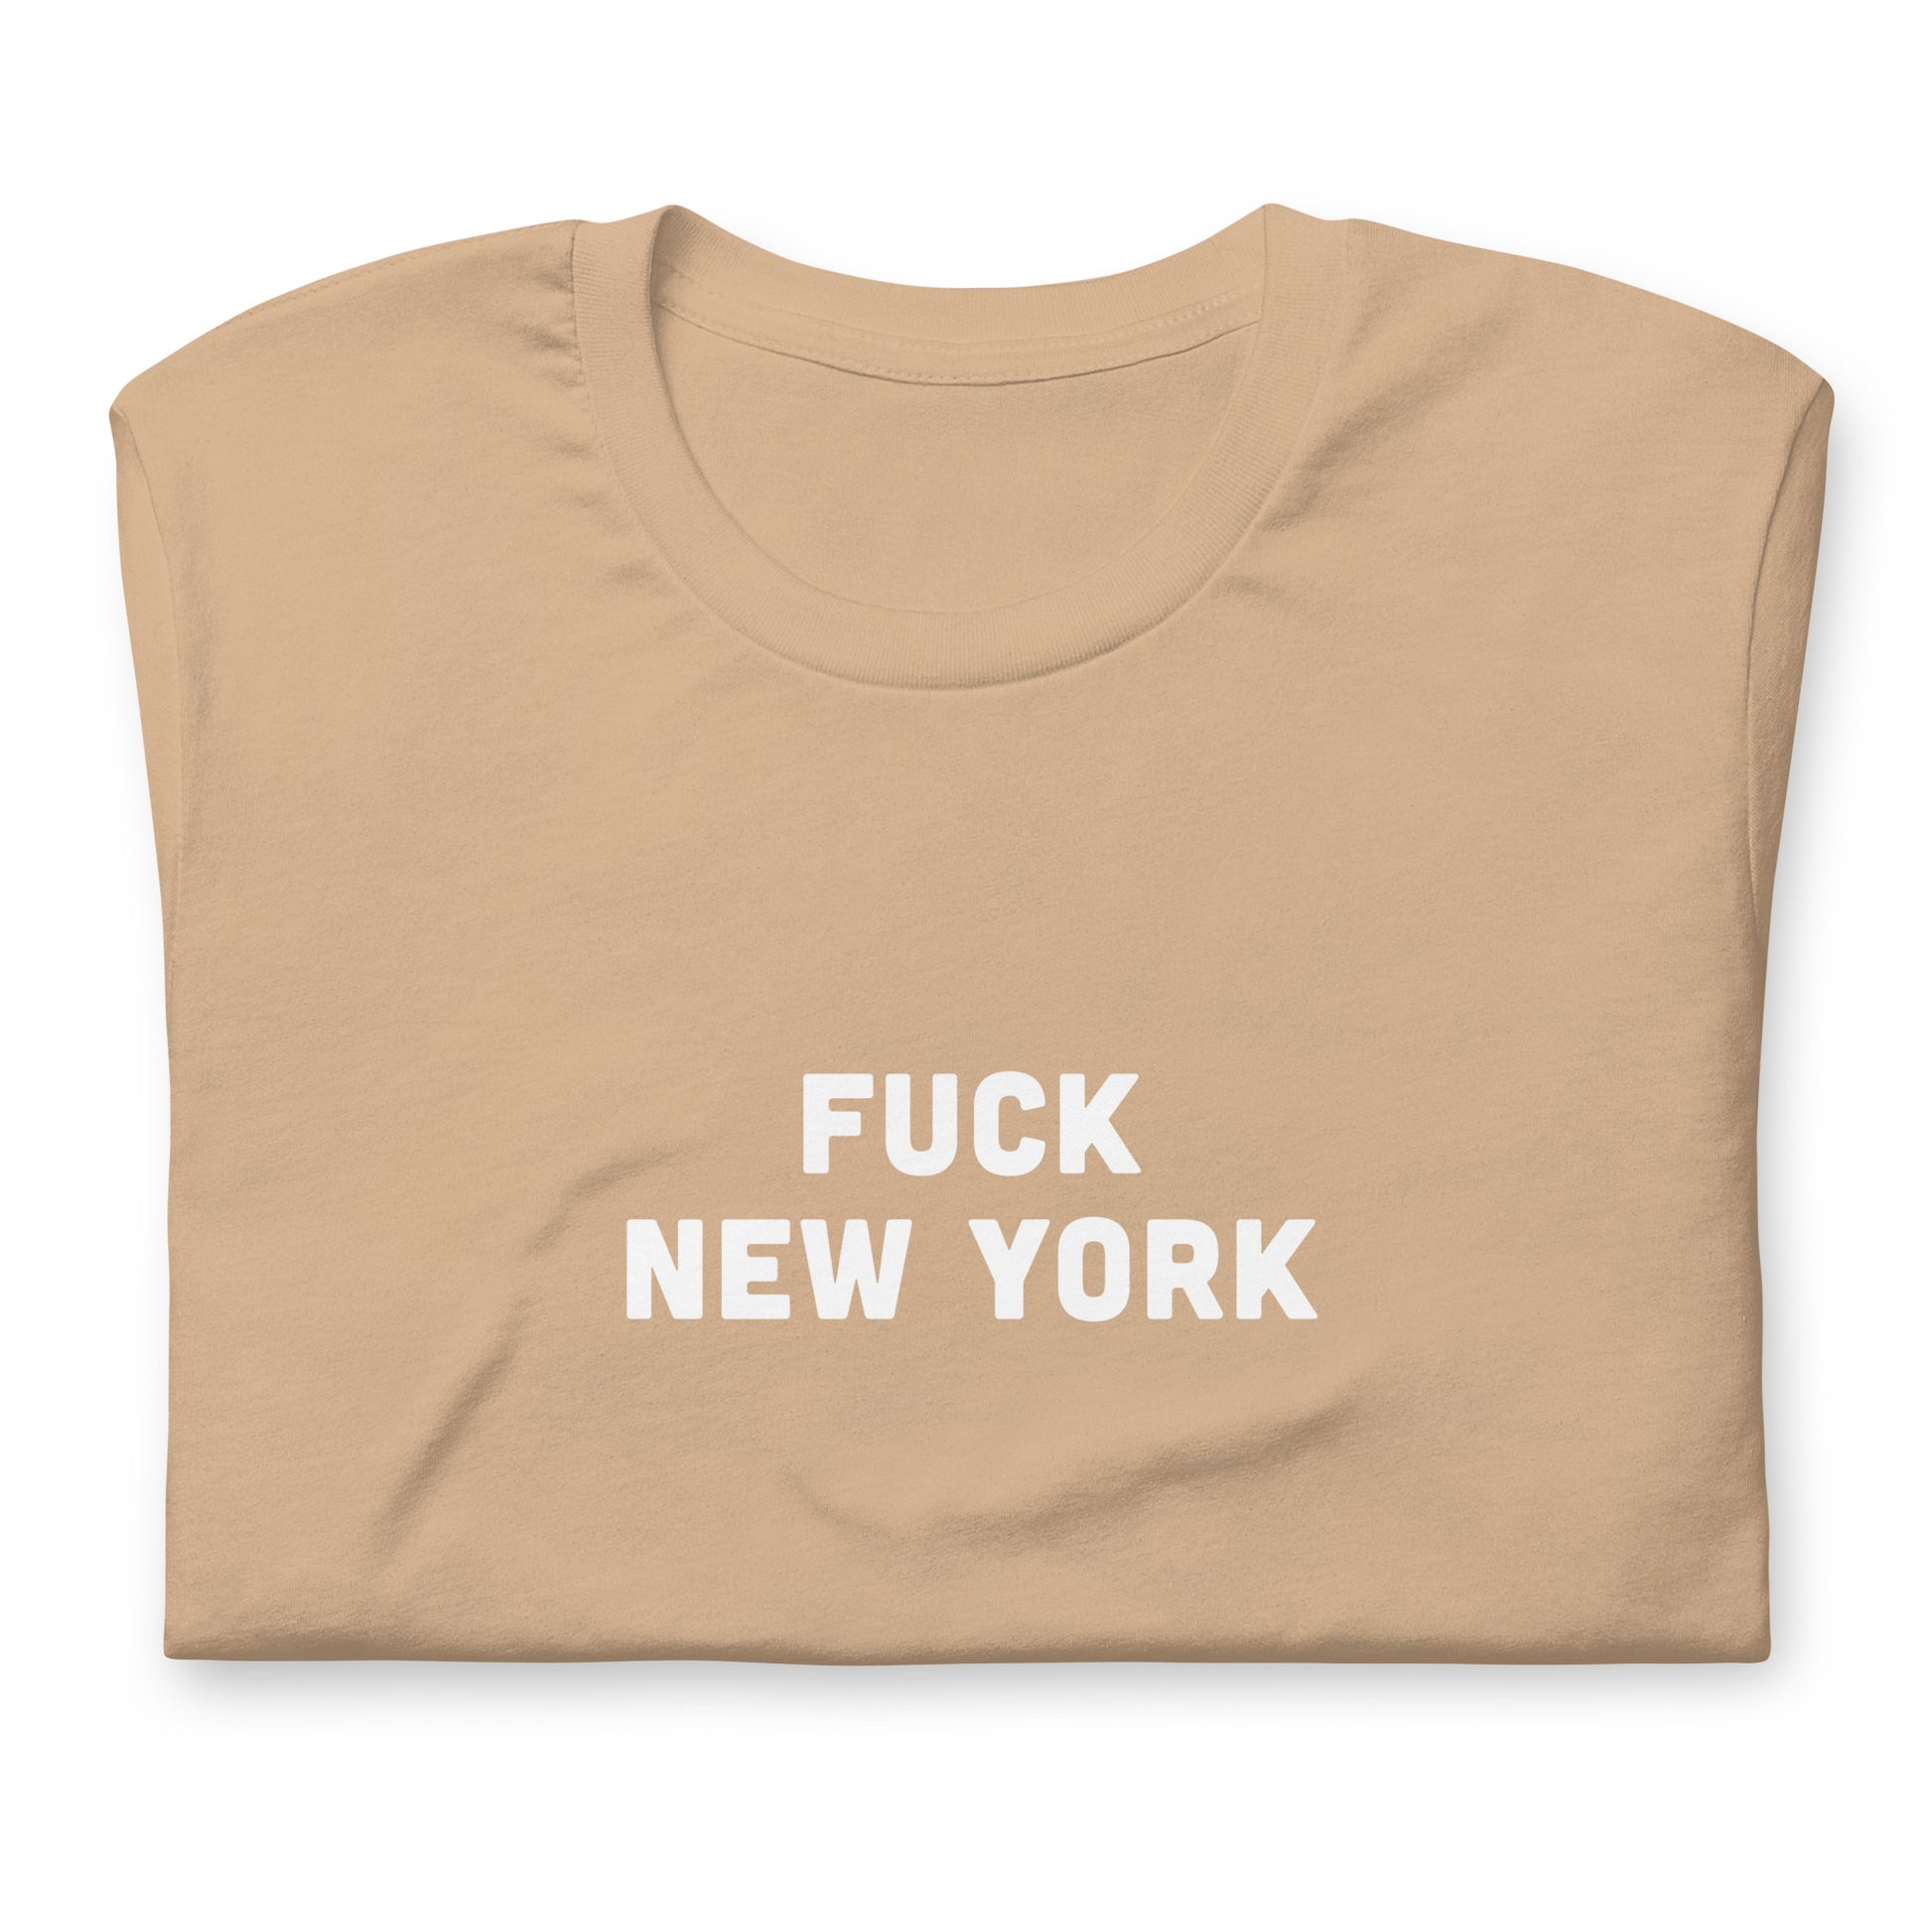 Fuck New York T-Shirt Size XL Color Forest